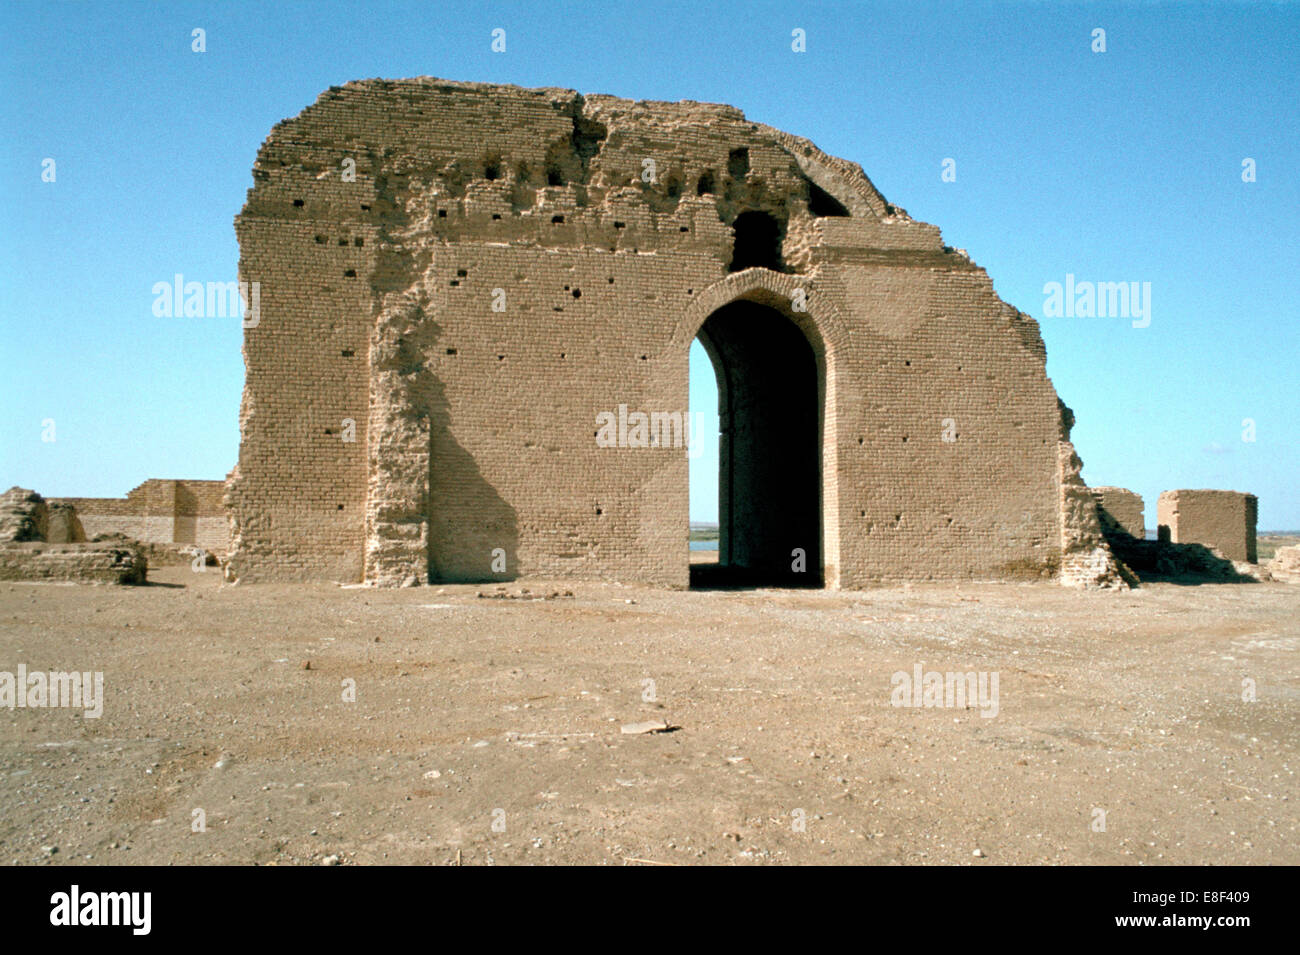 Doorway overlooking the River Tigris, ruins of the Caliph's Palace, Samarra, Iraq, 1977. Stock Photo